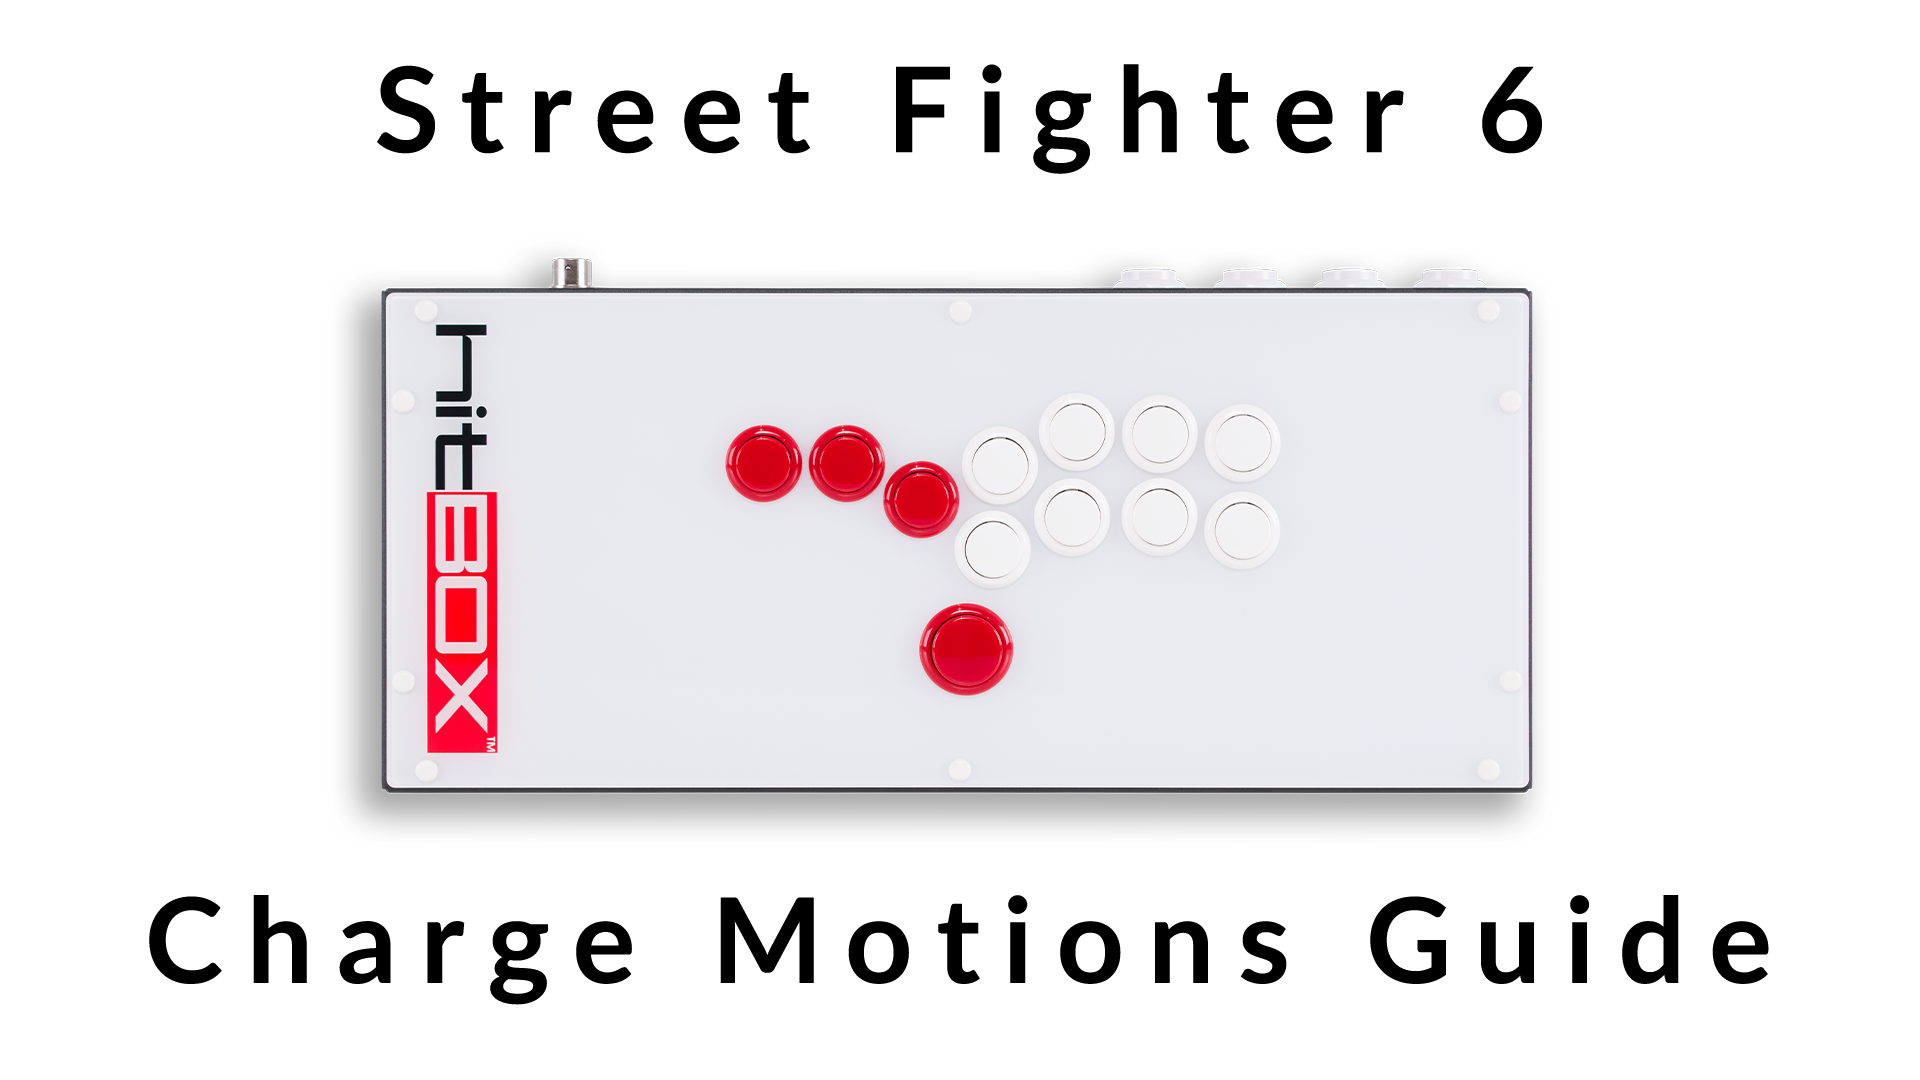 Street Fighter 6 on Hit Box - Charge Motions